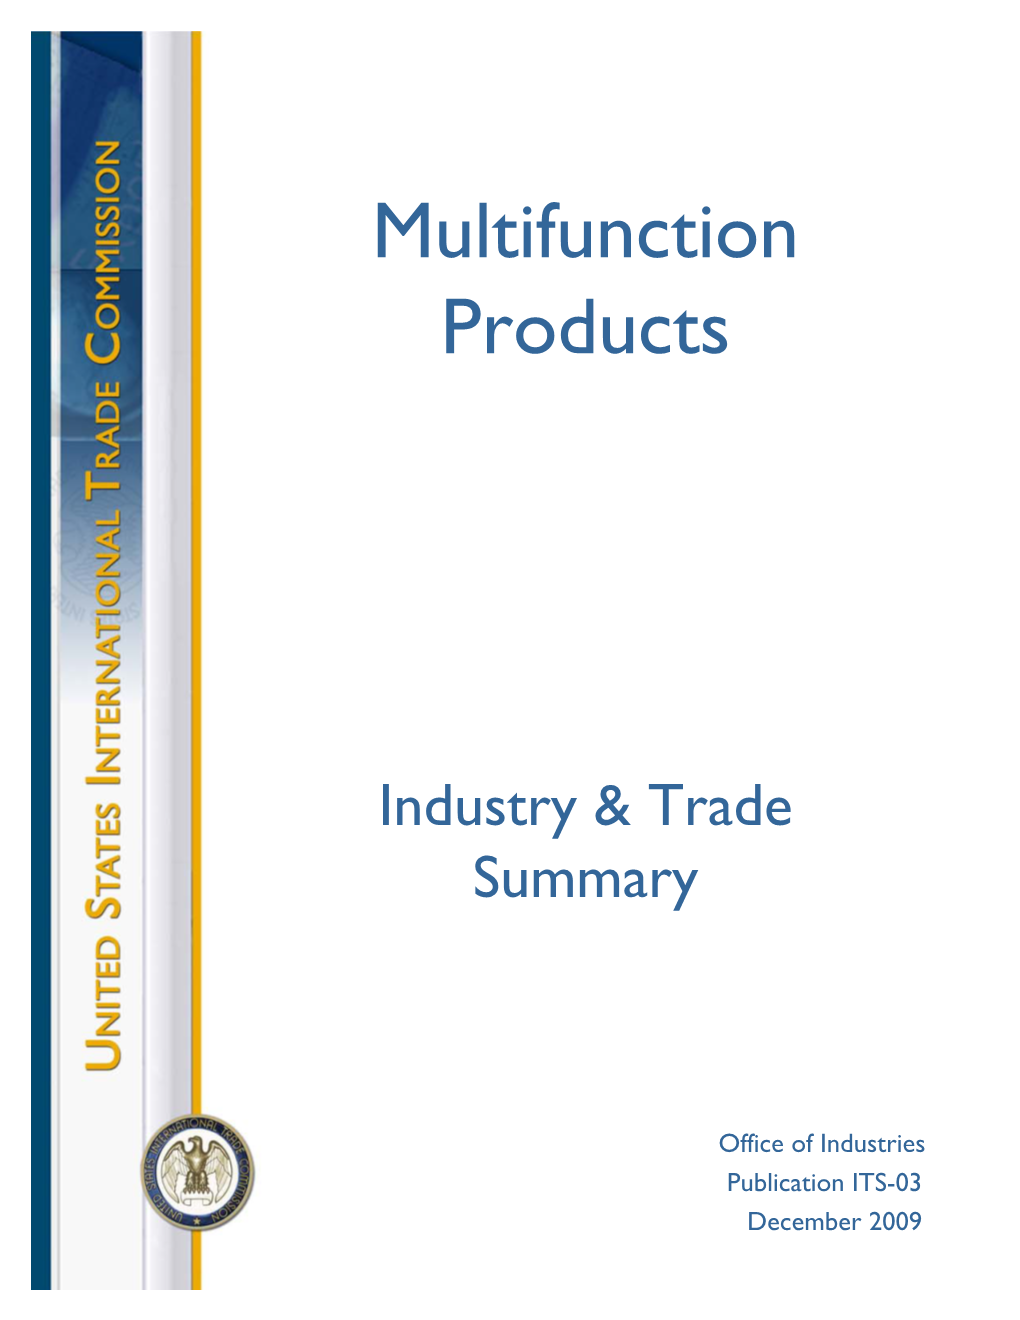 Multifunction Products